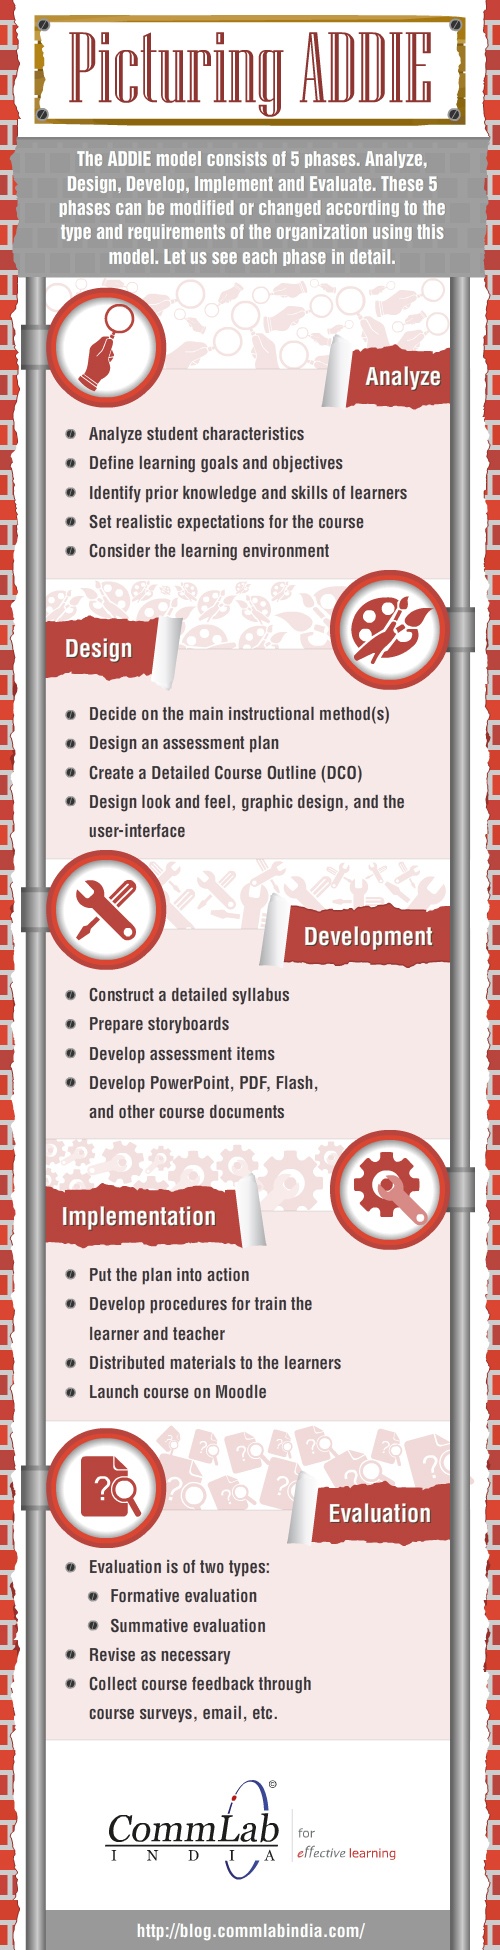 Picturing-the-ADDIE-Instructional-Design-Model-Infographic